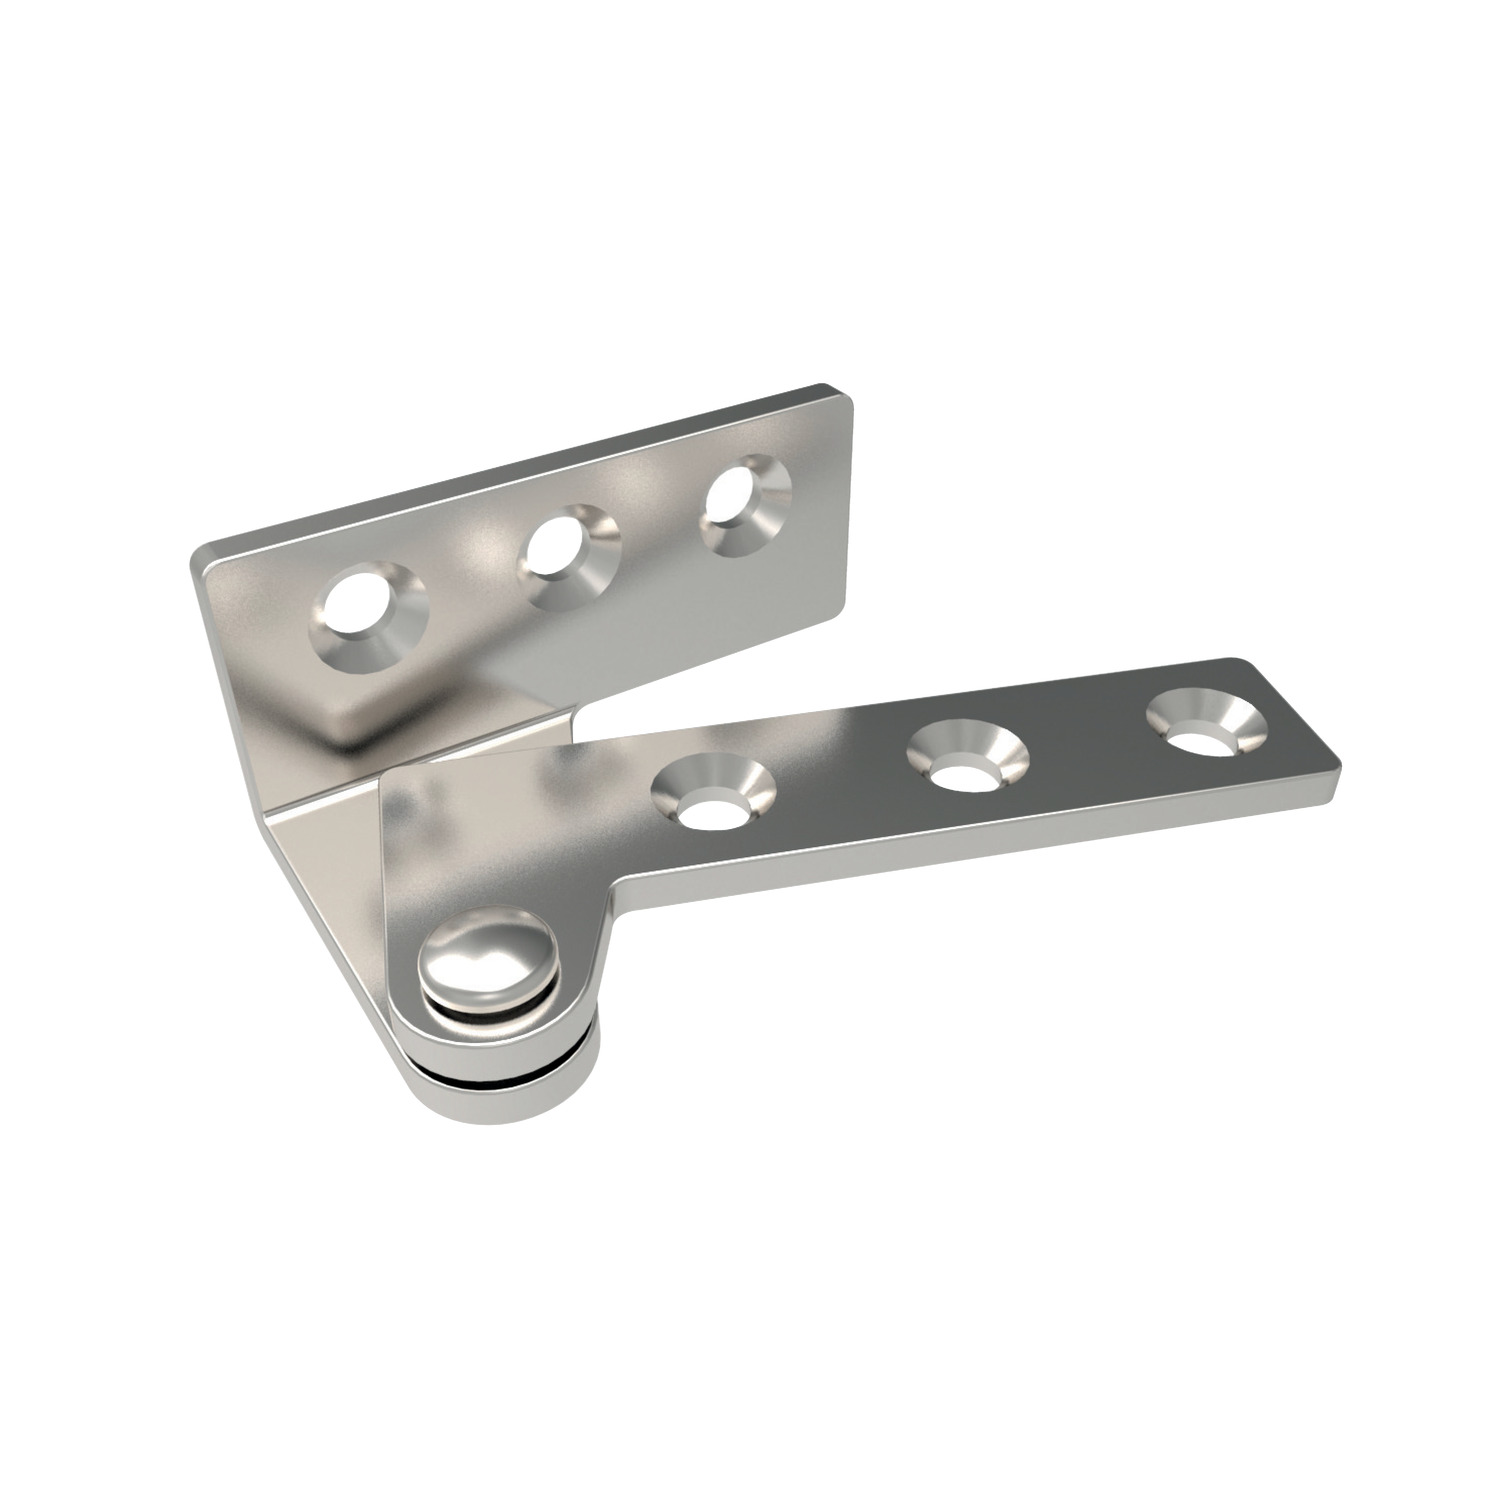 S0220.AC0010 Surface Mount - Pivot Hinges Overlay - Stainless steel - Right